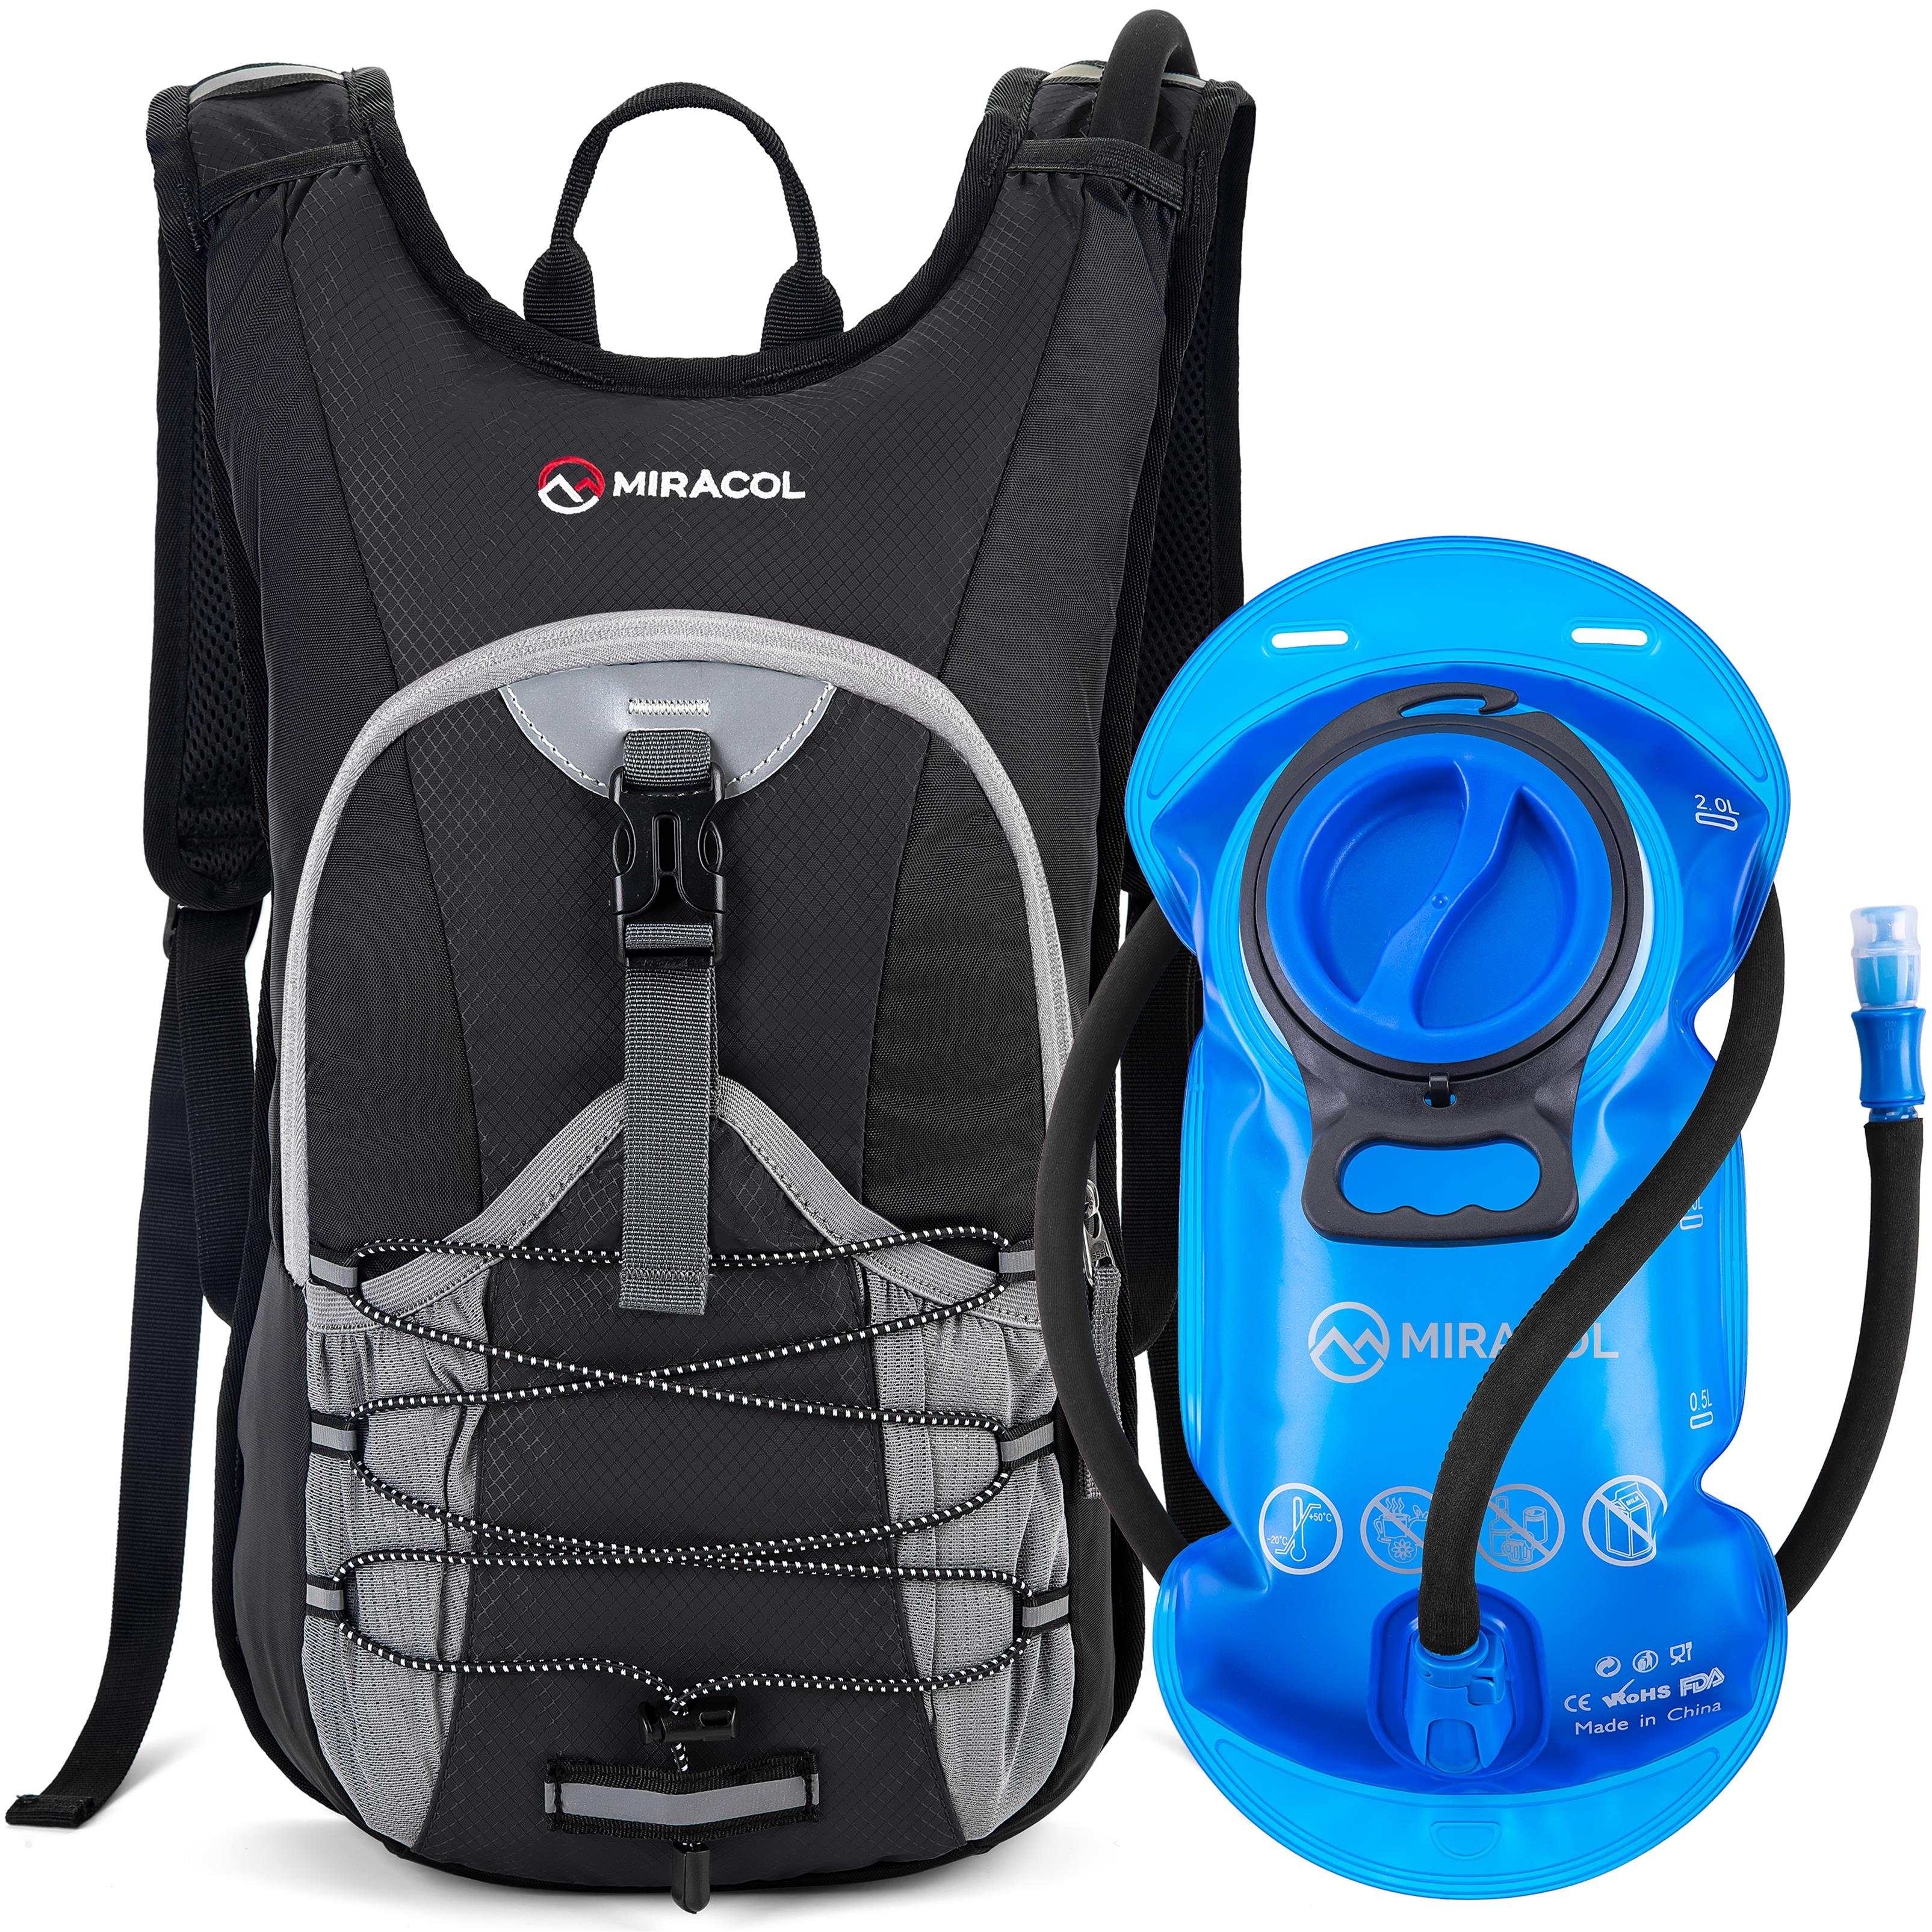 MIRACOL 15L Insulated Hydration Backpack Hydration Pack Lightweigh Hydro Backpack